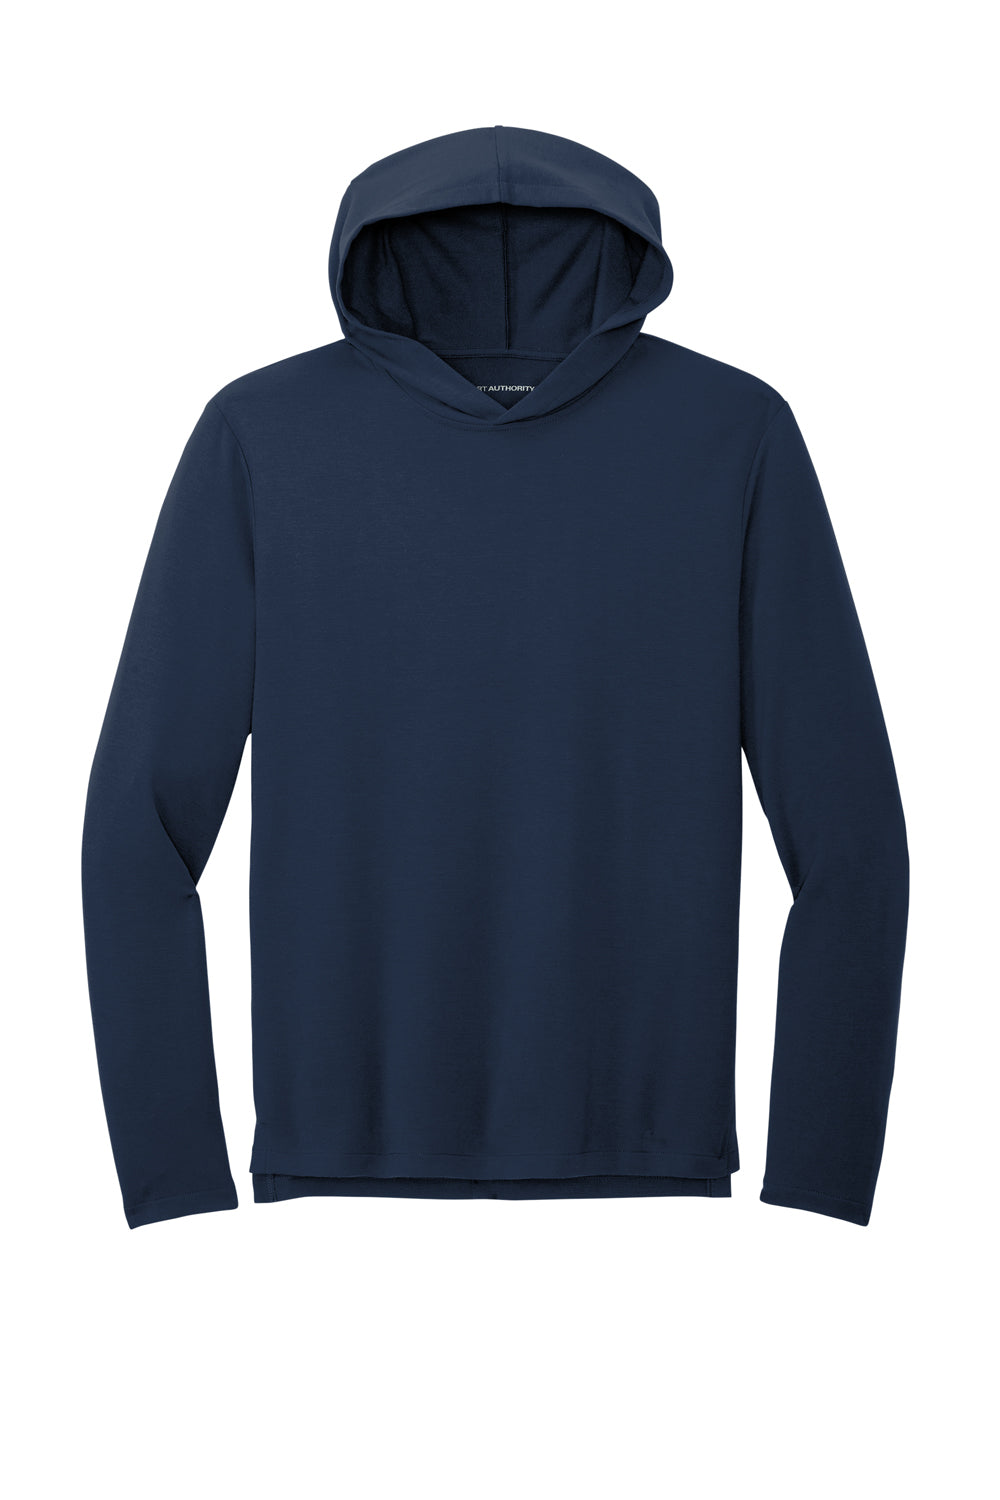 Port Authority K826 Mens Microterry Hooded Sweatshirt Hoodie River Navy Blue Flat Front